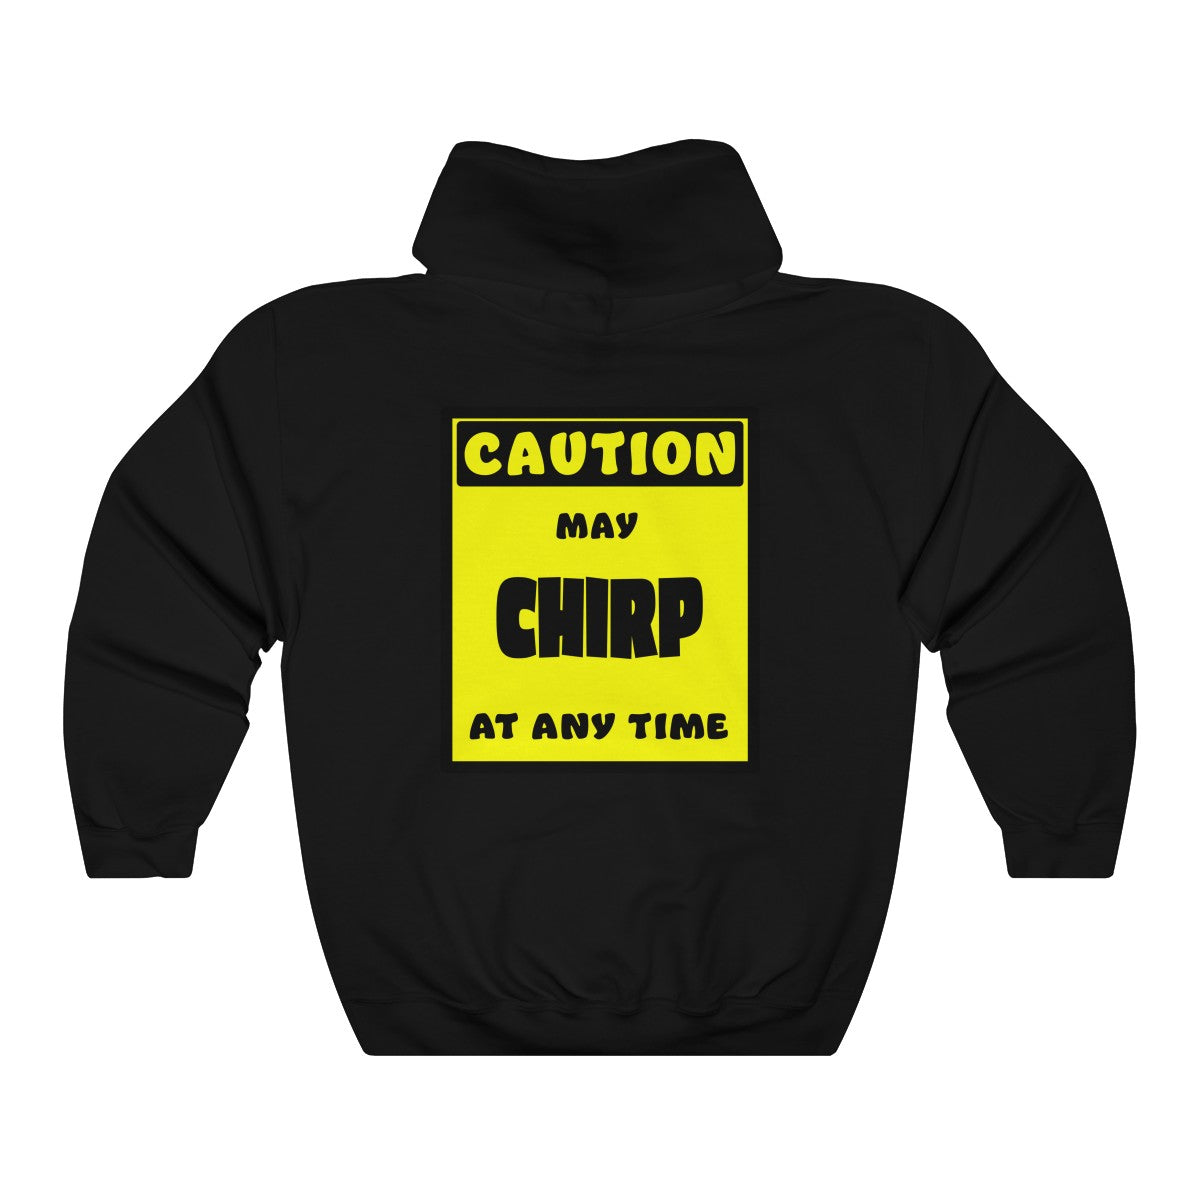 CAUTION! May CHIRP at any time! - Hoodie Hoodie AFLT-Whootorca Black S 